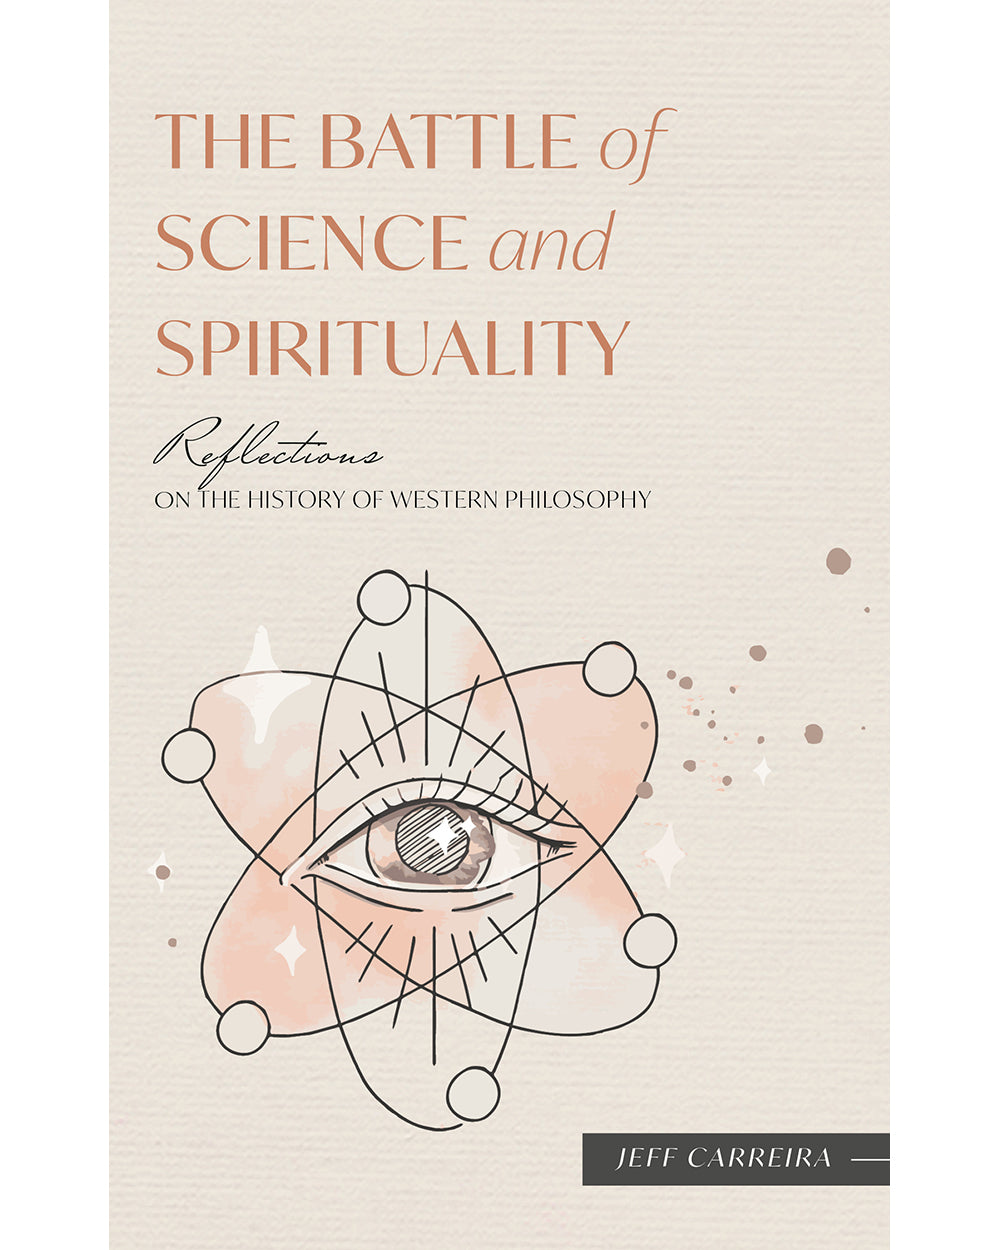 The Battle of Science and Spirituality: Reflections on the History of Western Philosophy